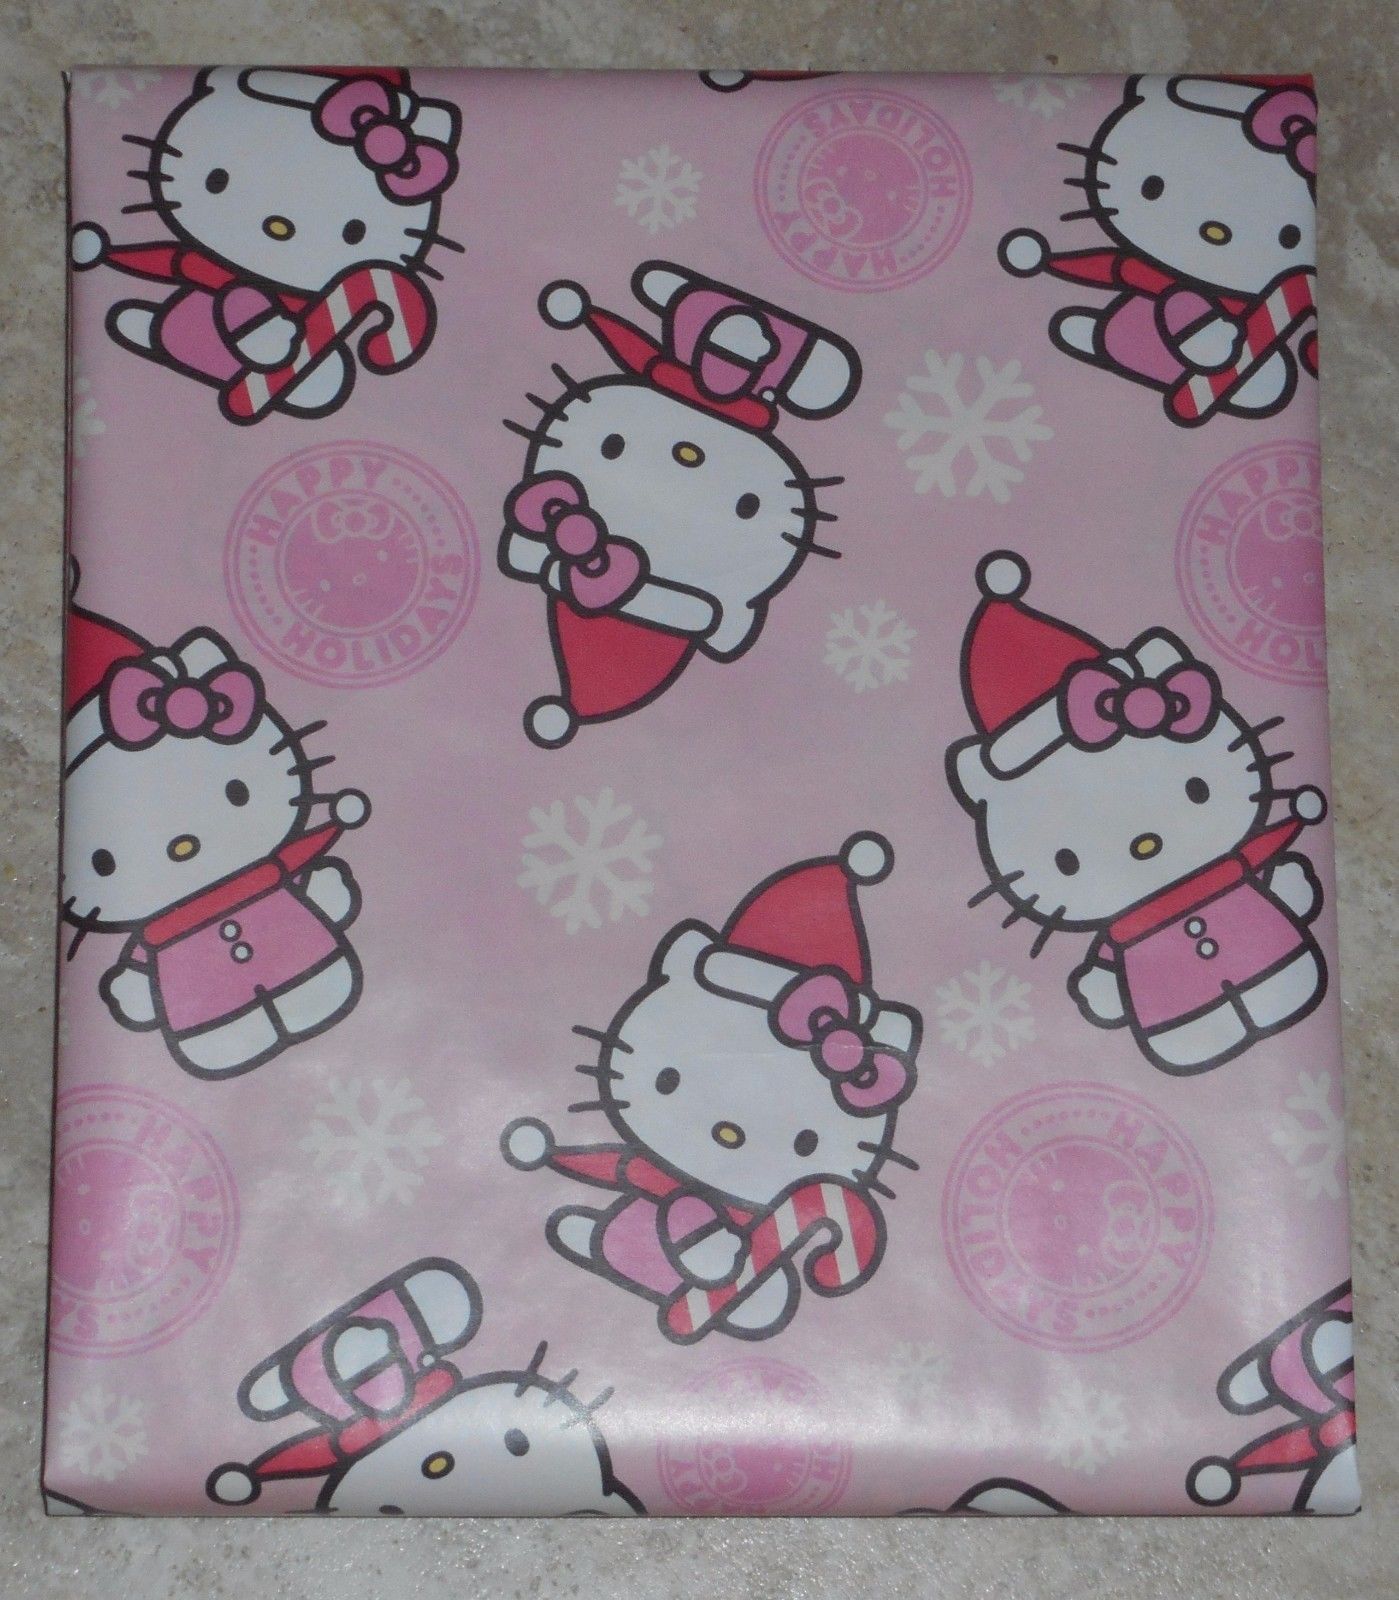 HELLO KITTY WRAPPING PAPER ROLL GIFT CHRISTMAS HOLIDAY 20 SQUARE